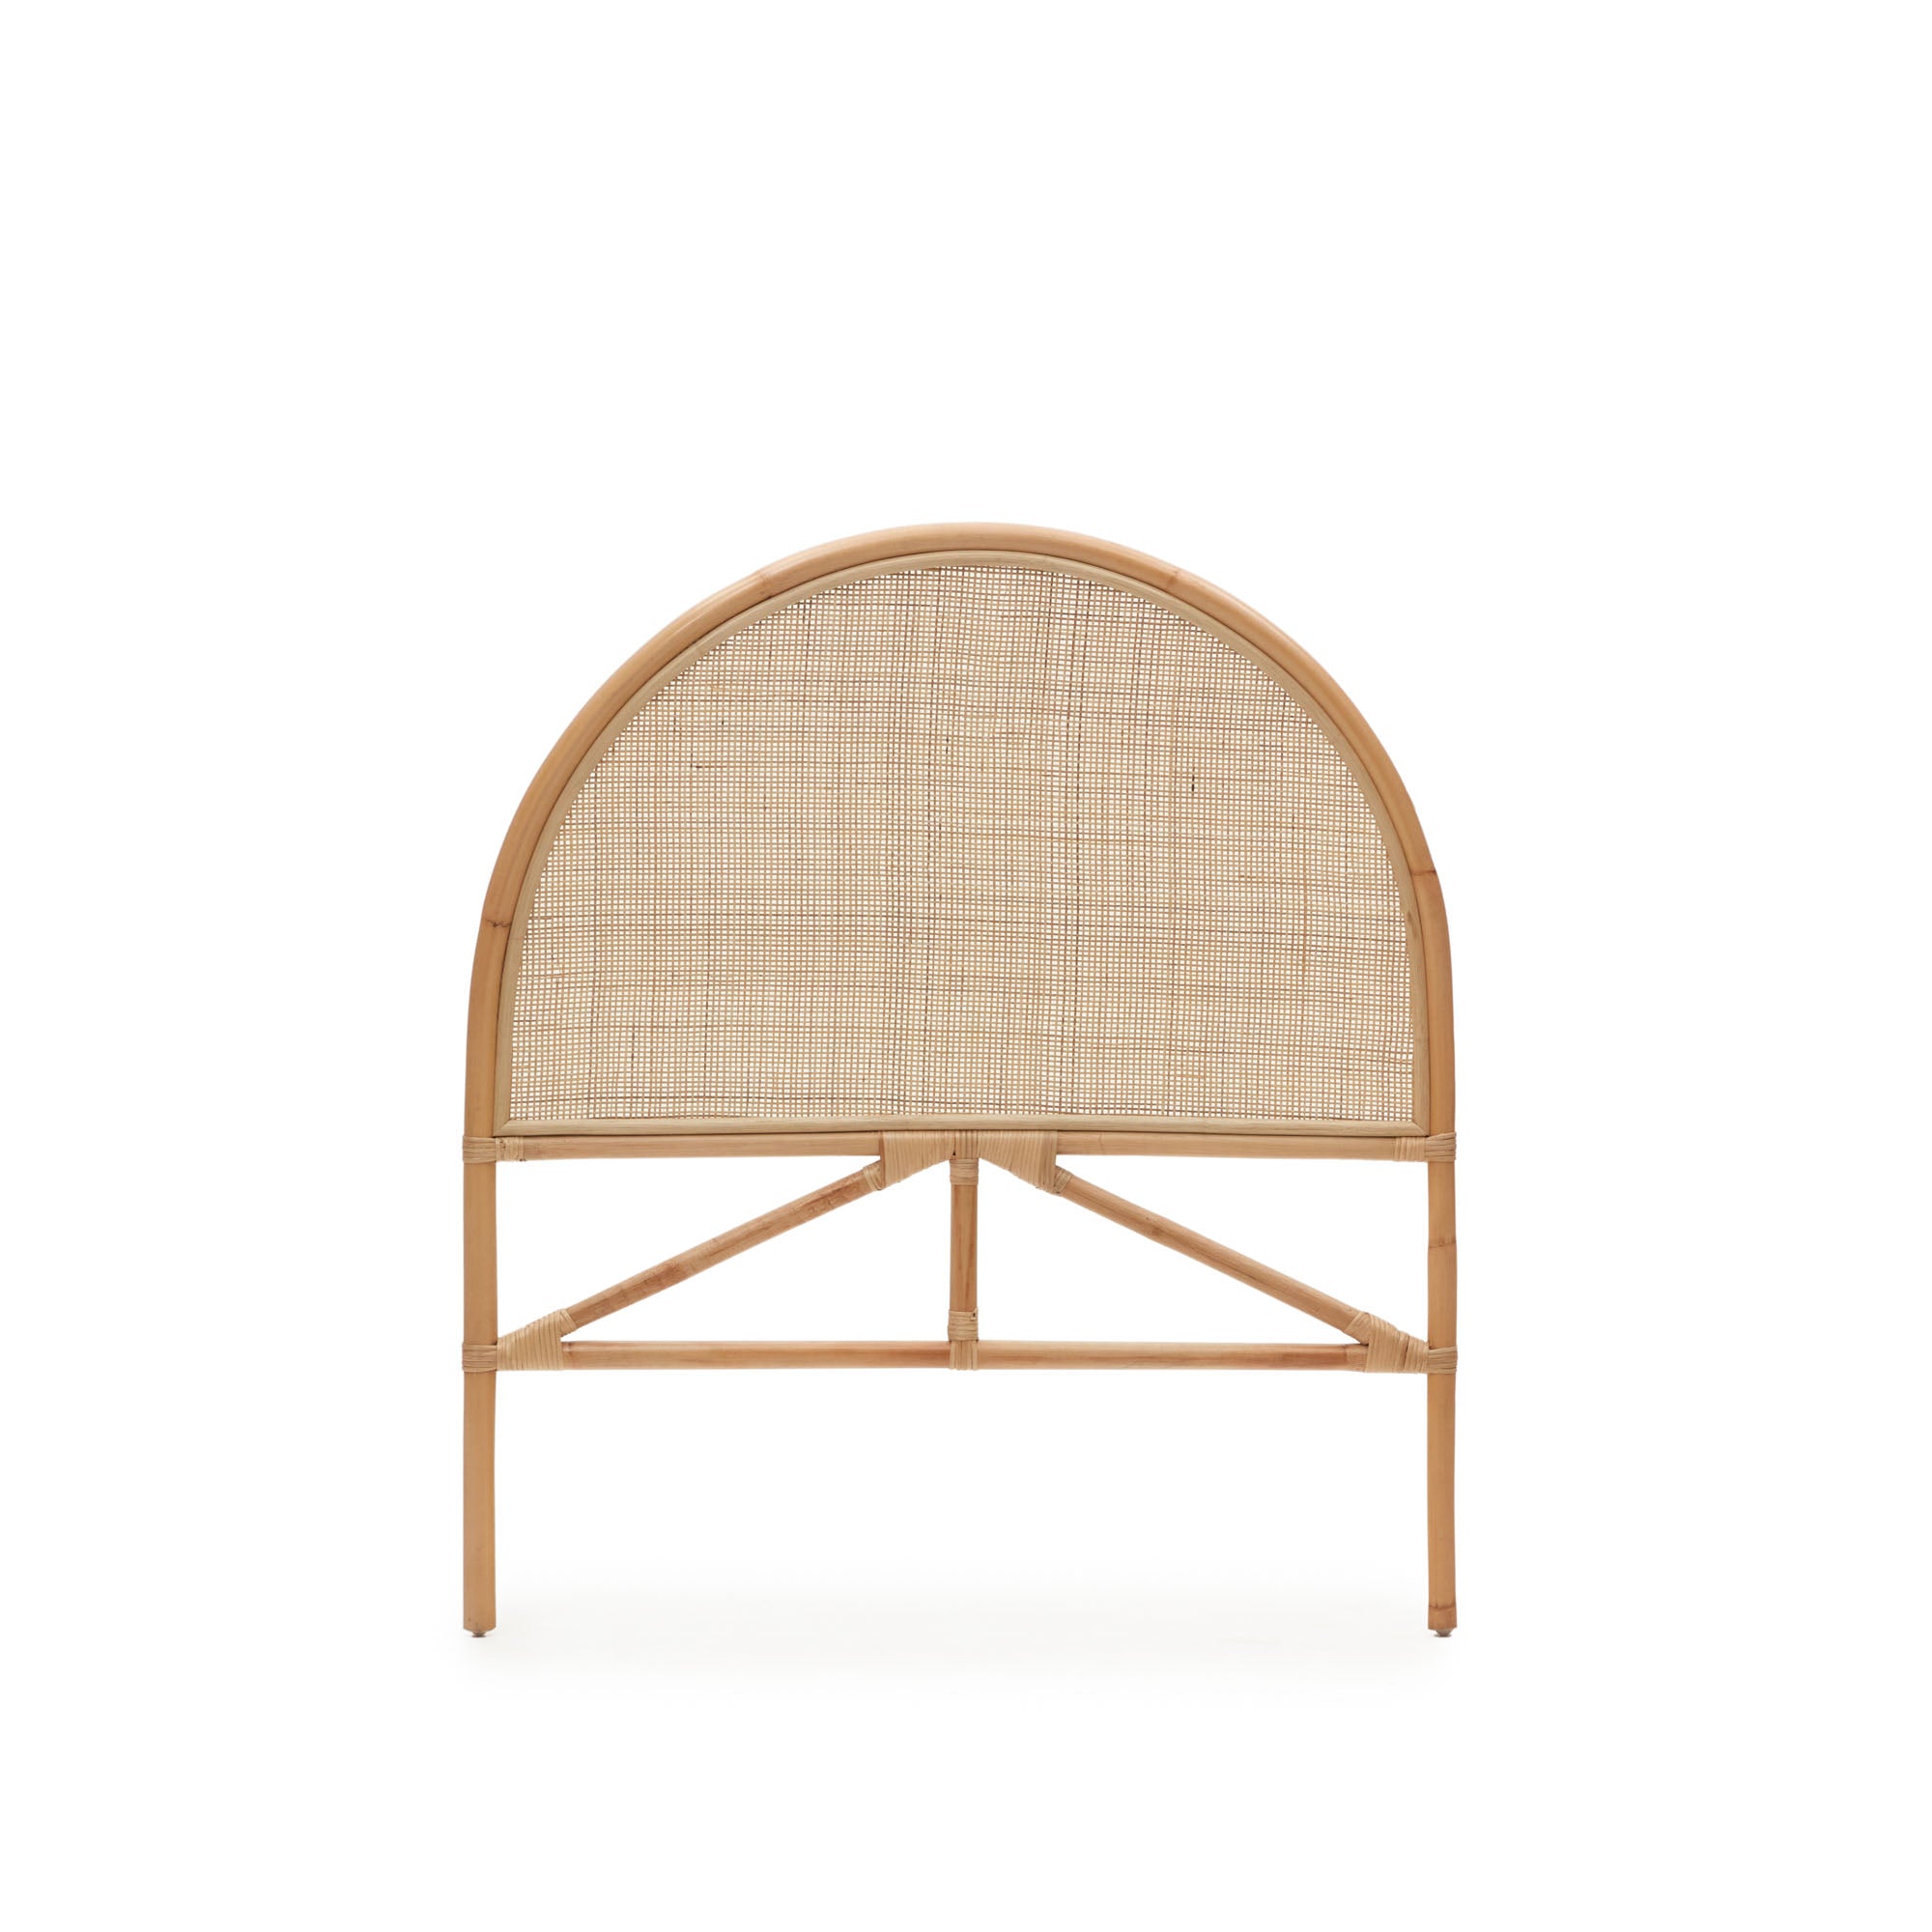 Quiterie round rattan headboard with a natural finish, 90 cm